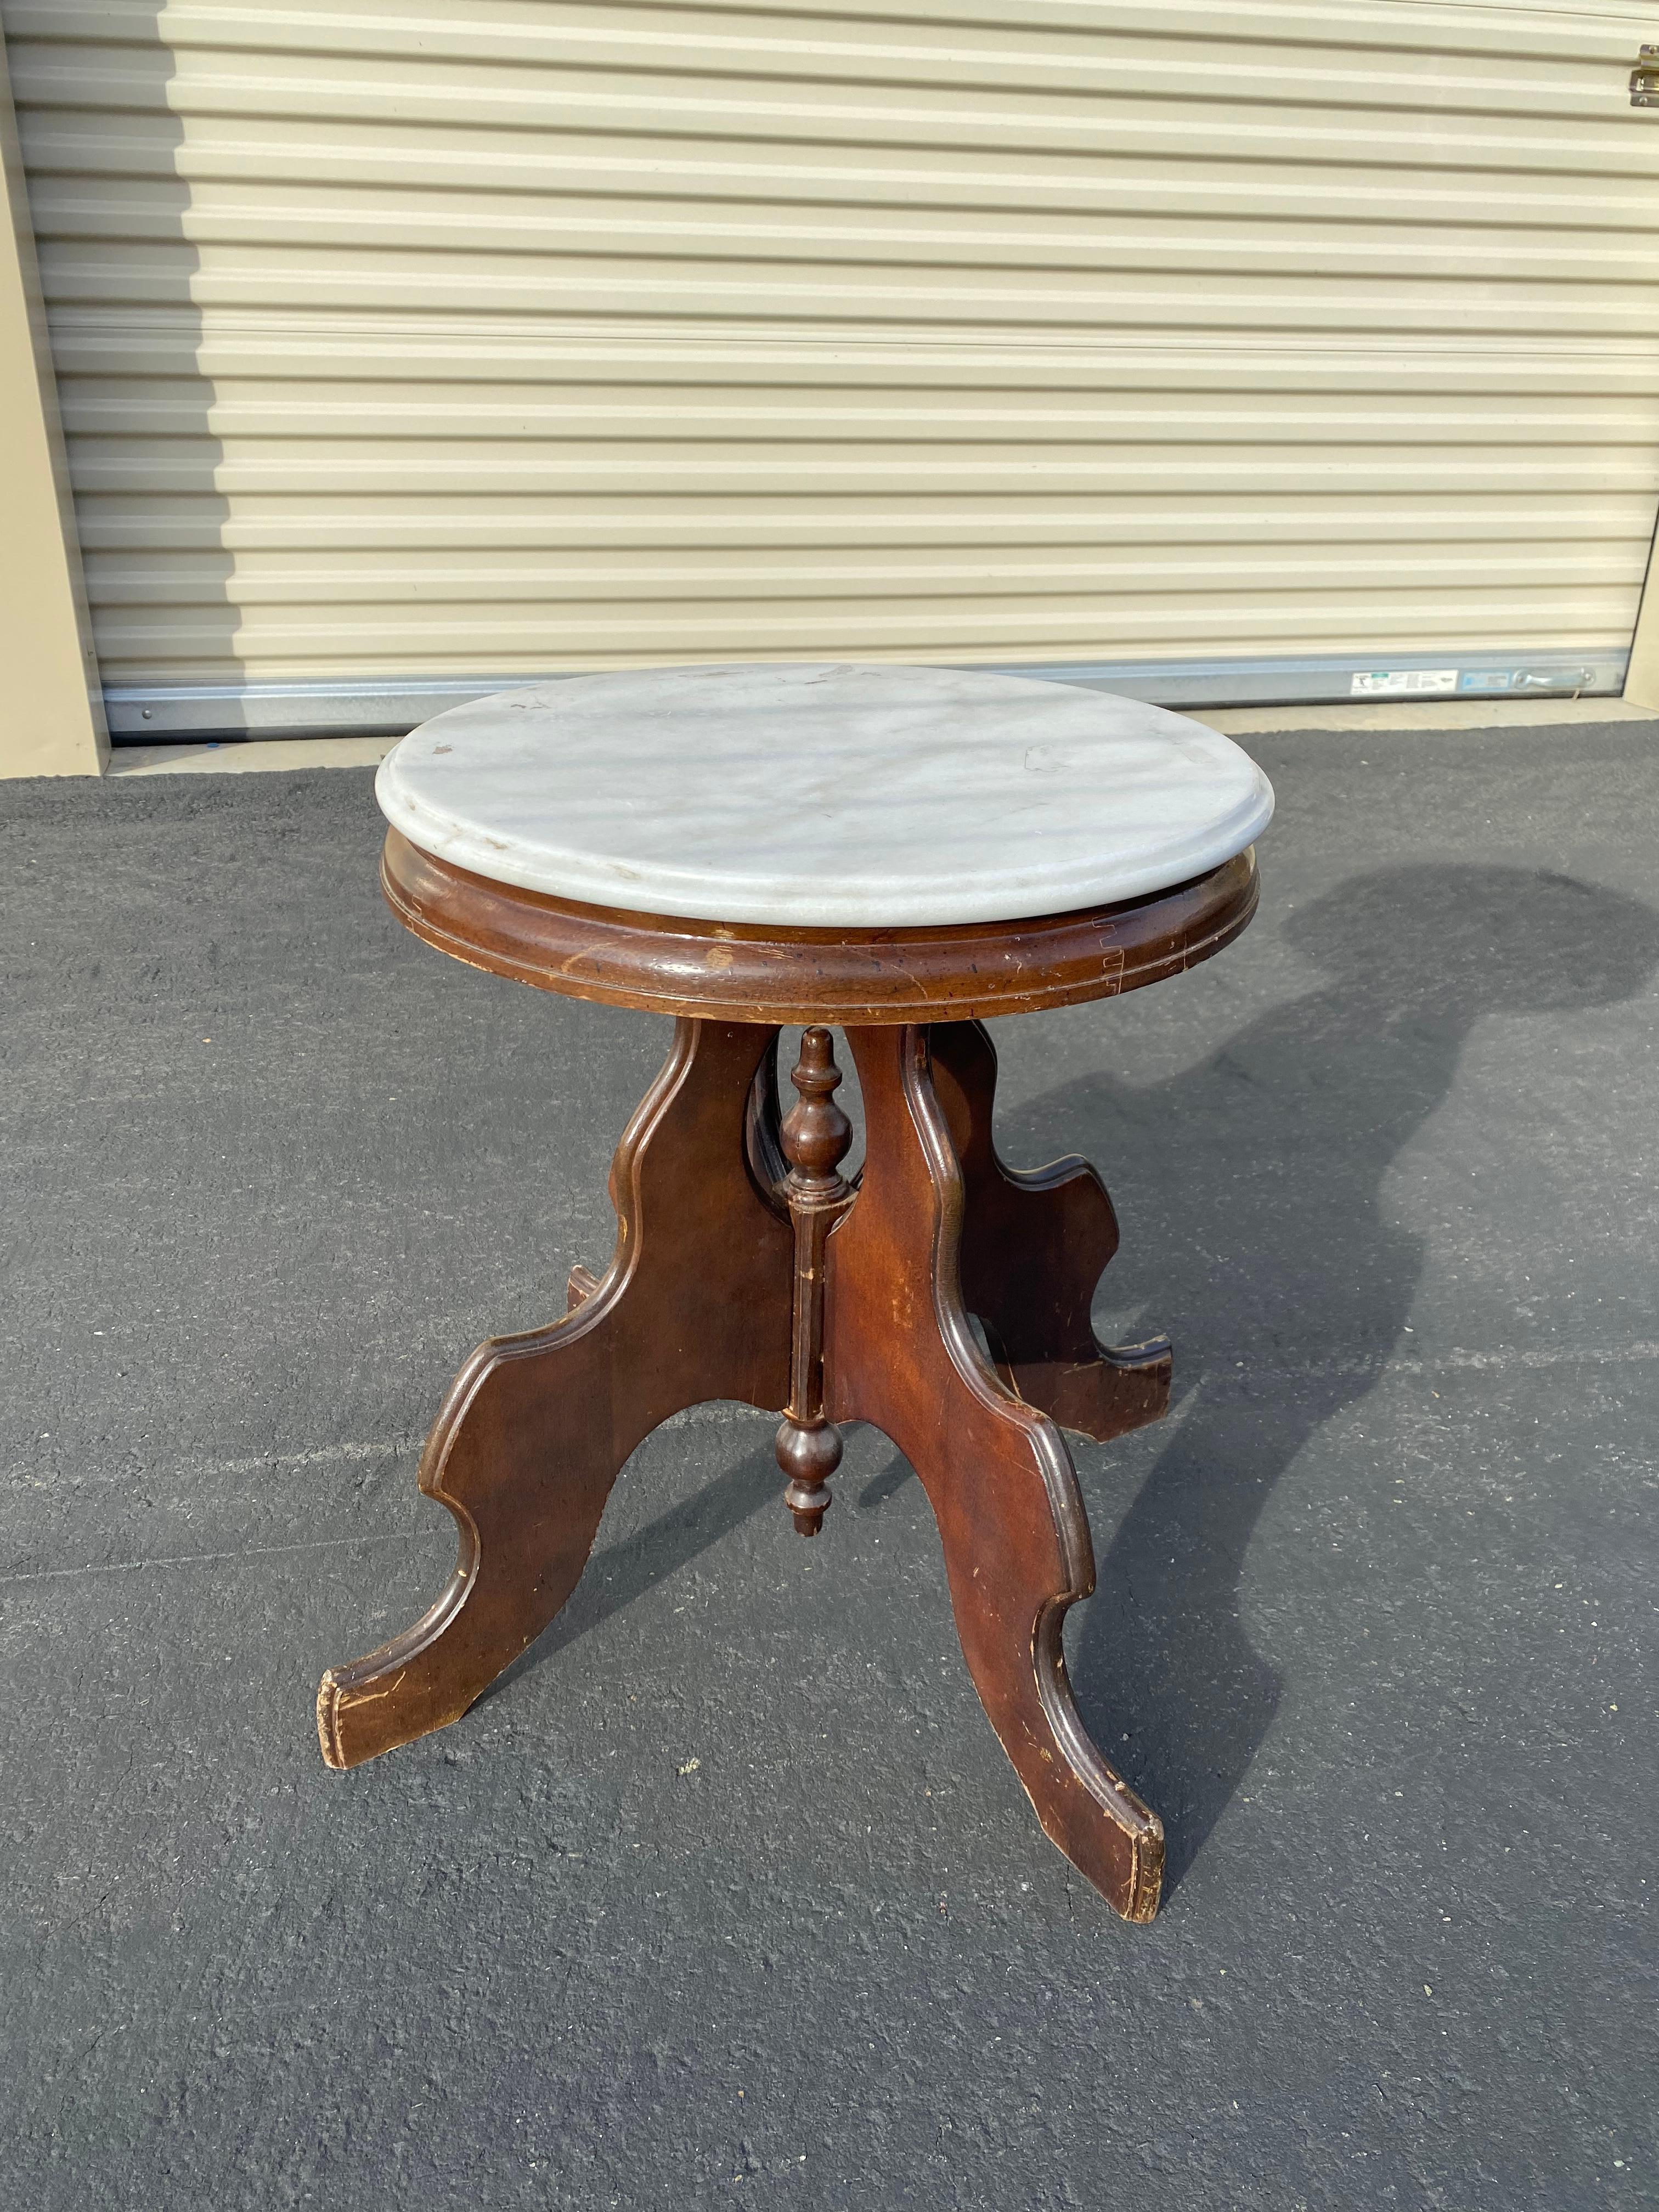 Antique Victorian Eastlake parlor table, circa 1880s. Made from walnut with an oval white marble top. Base features a turned center support surrounded by four serpentine carved legs leading to castors.